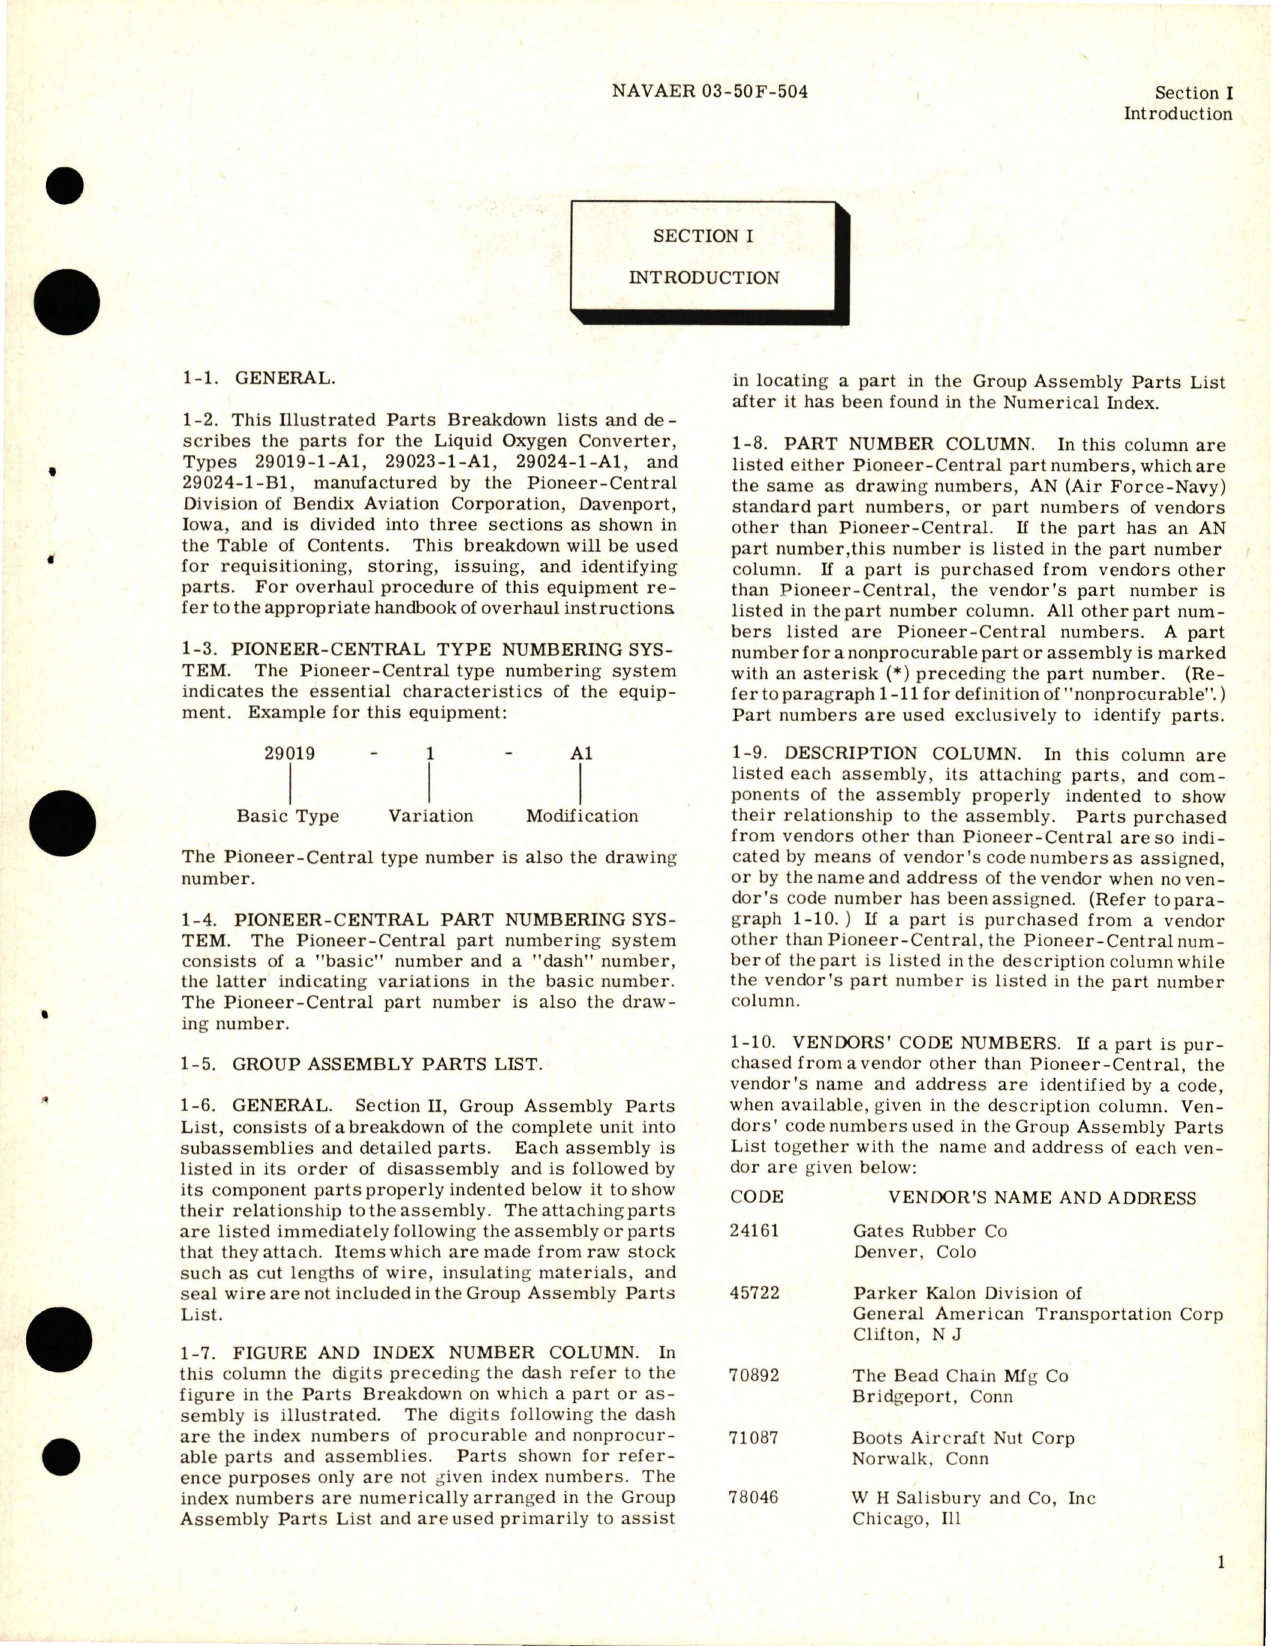 Sample page 5 from AirCorps Library document: Illustrated Parts Breakdown for Liquid Oxygen Converter - Type - 29019-1-A1, 29023-1-A1, 29024-1-A1, and 29024-1-B1